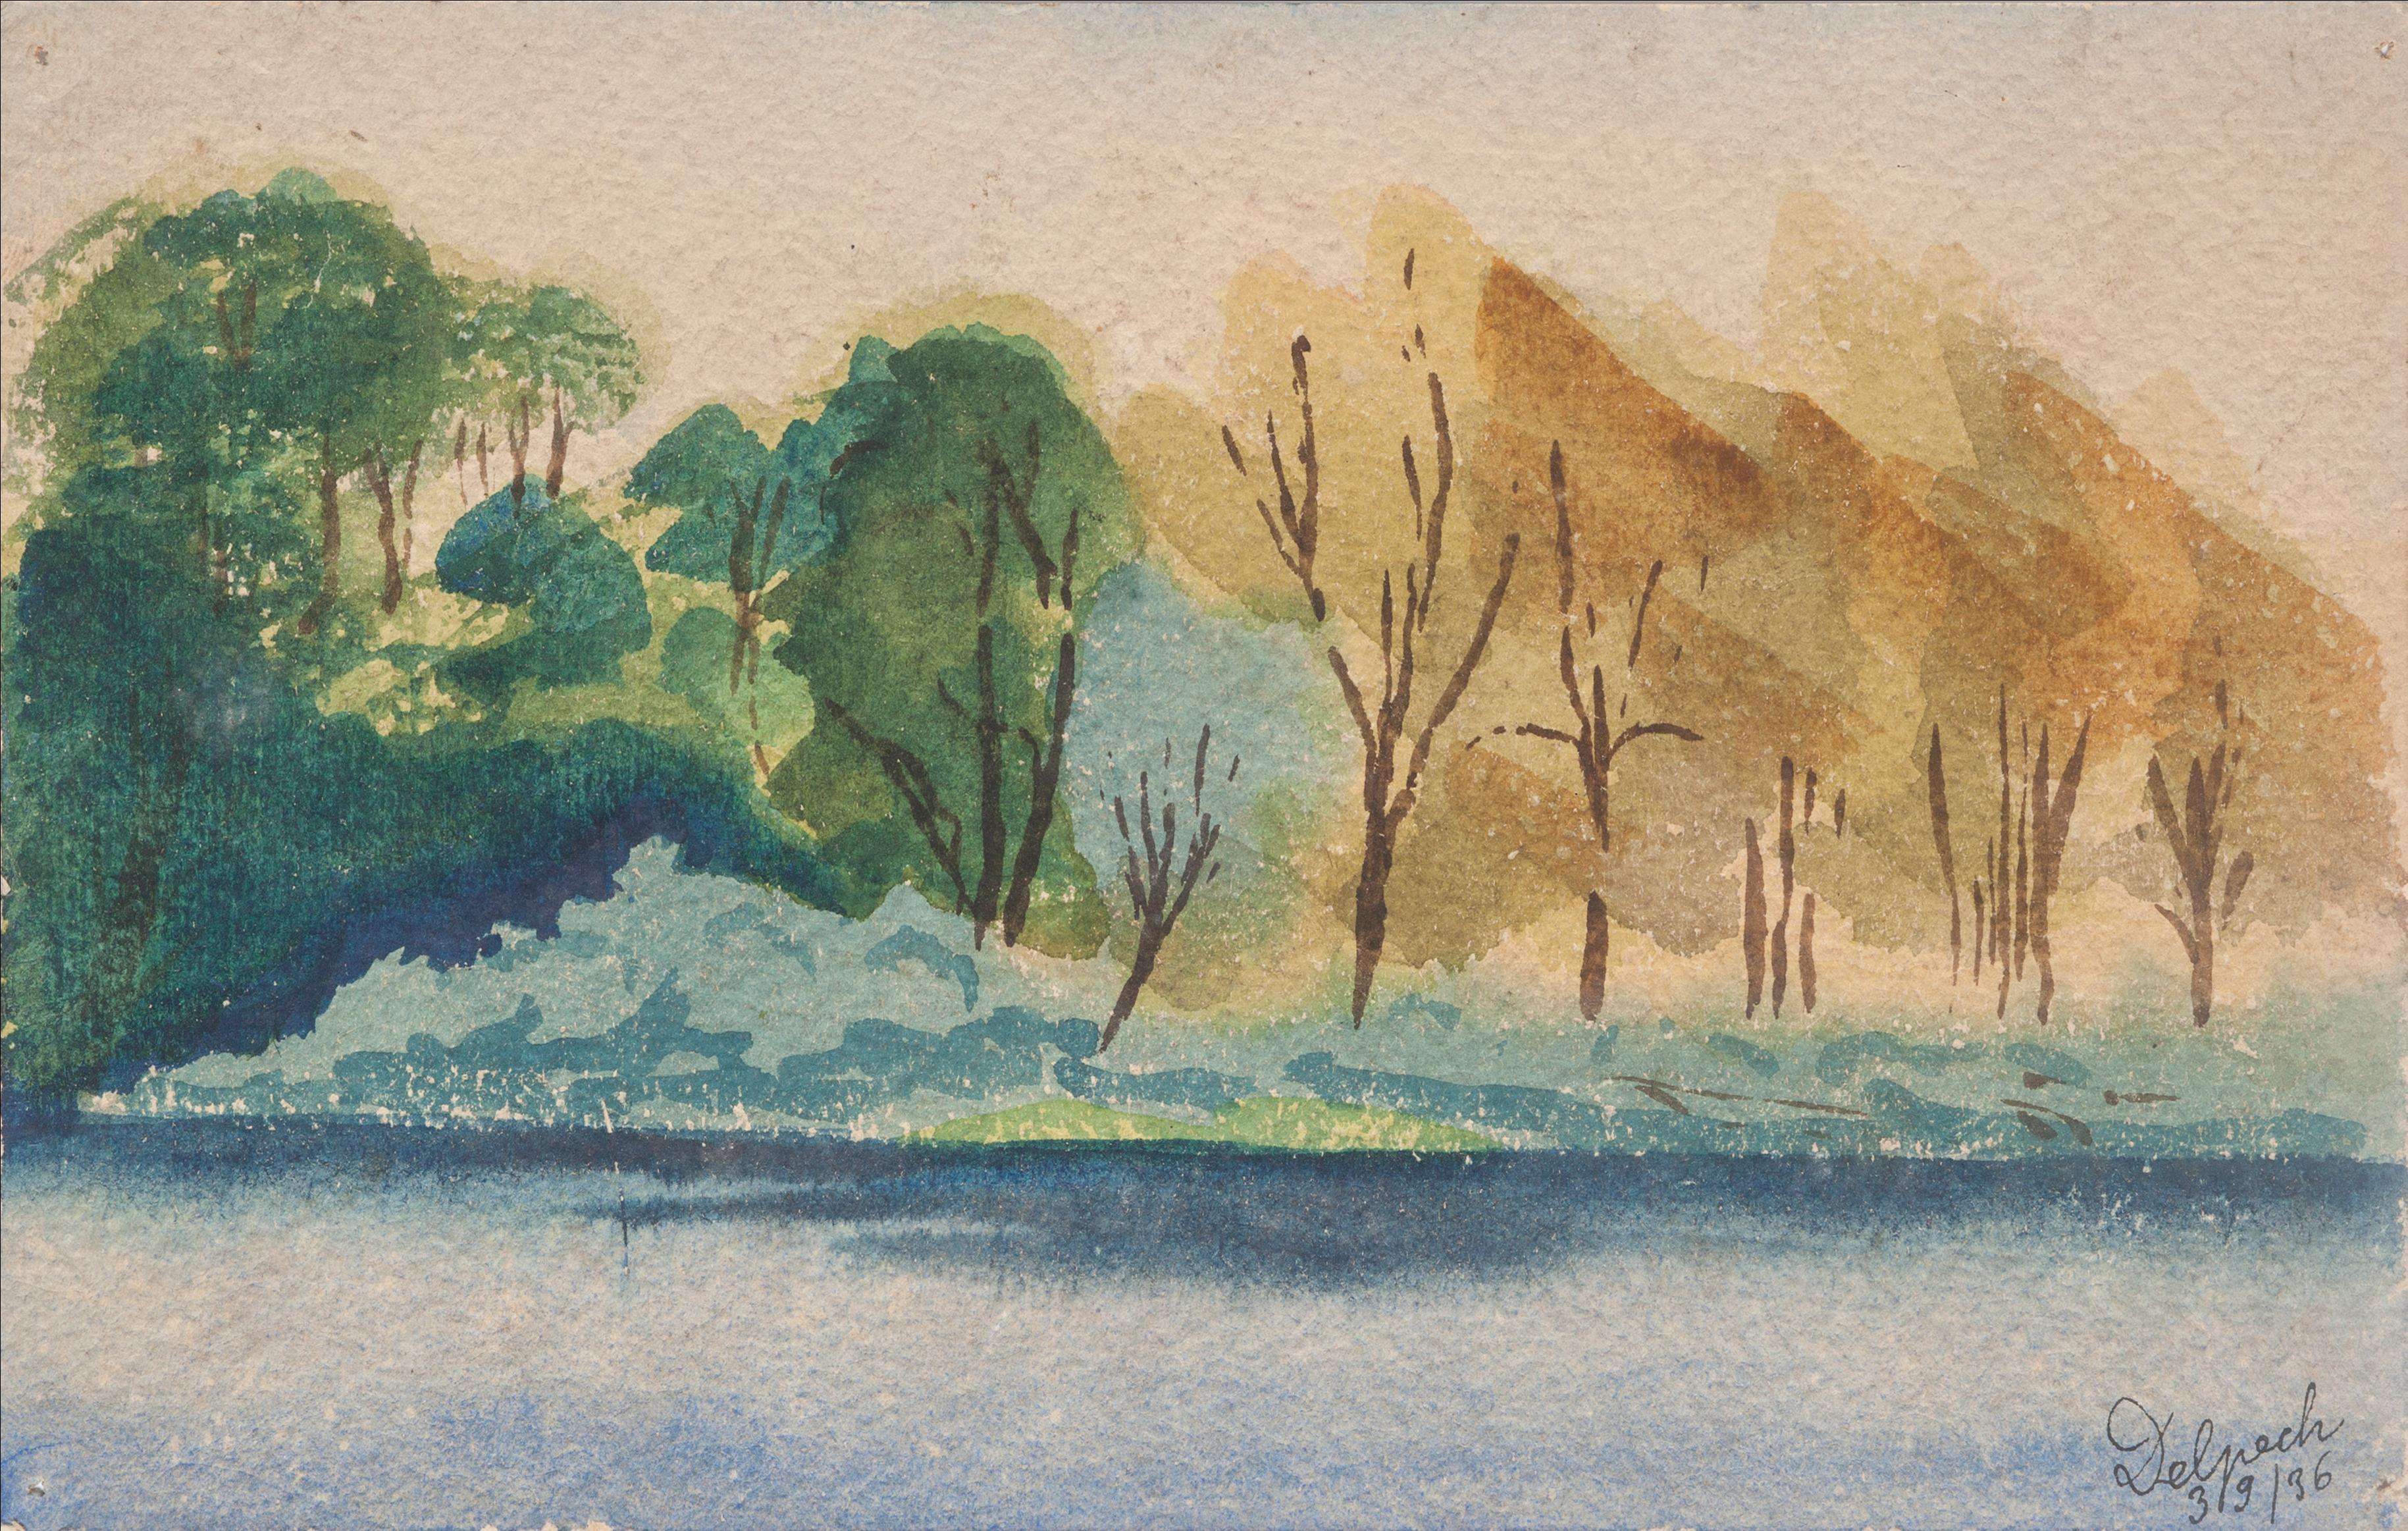 "Landscape" (1936) is an original drawing in watercolor on paper, realized by Jean Delpech (1916-1988). 
The state of preservation of the artwork is very good.

Sheet dimension: 15 x 23.6 cm.

The artwork represents beautiful landscape with vivid